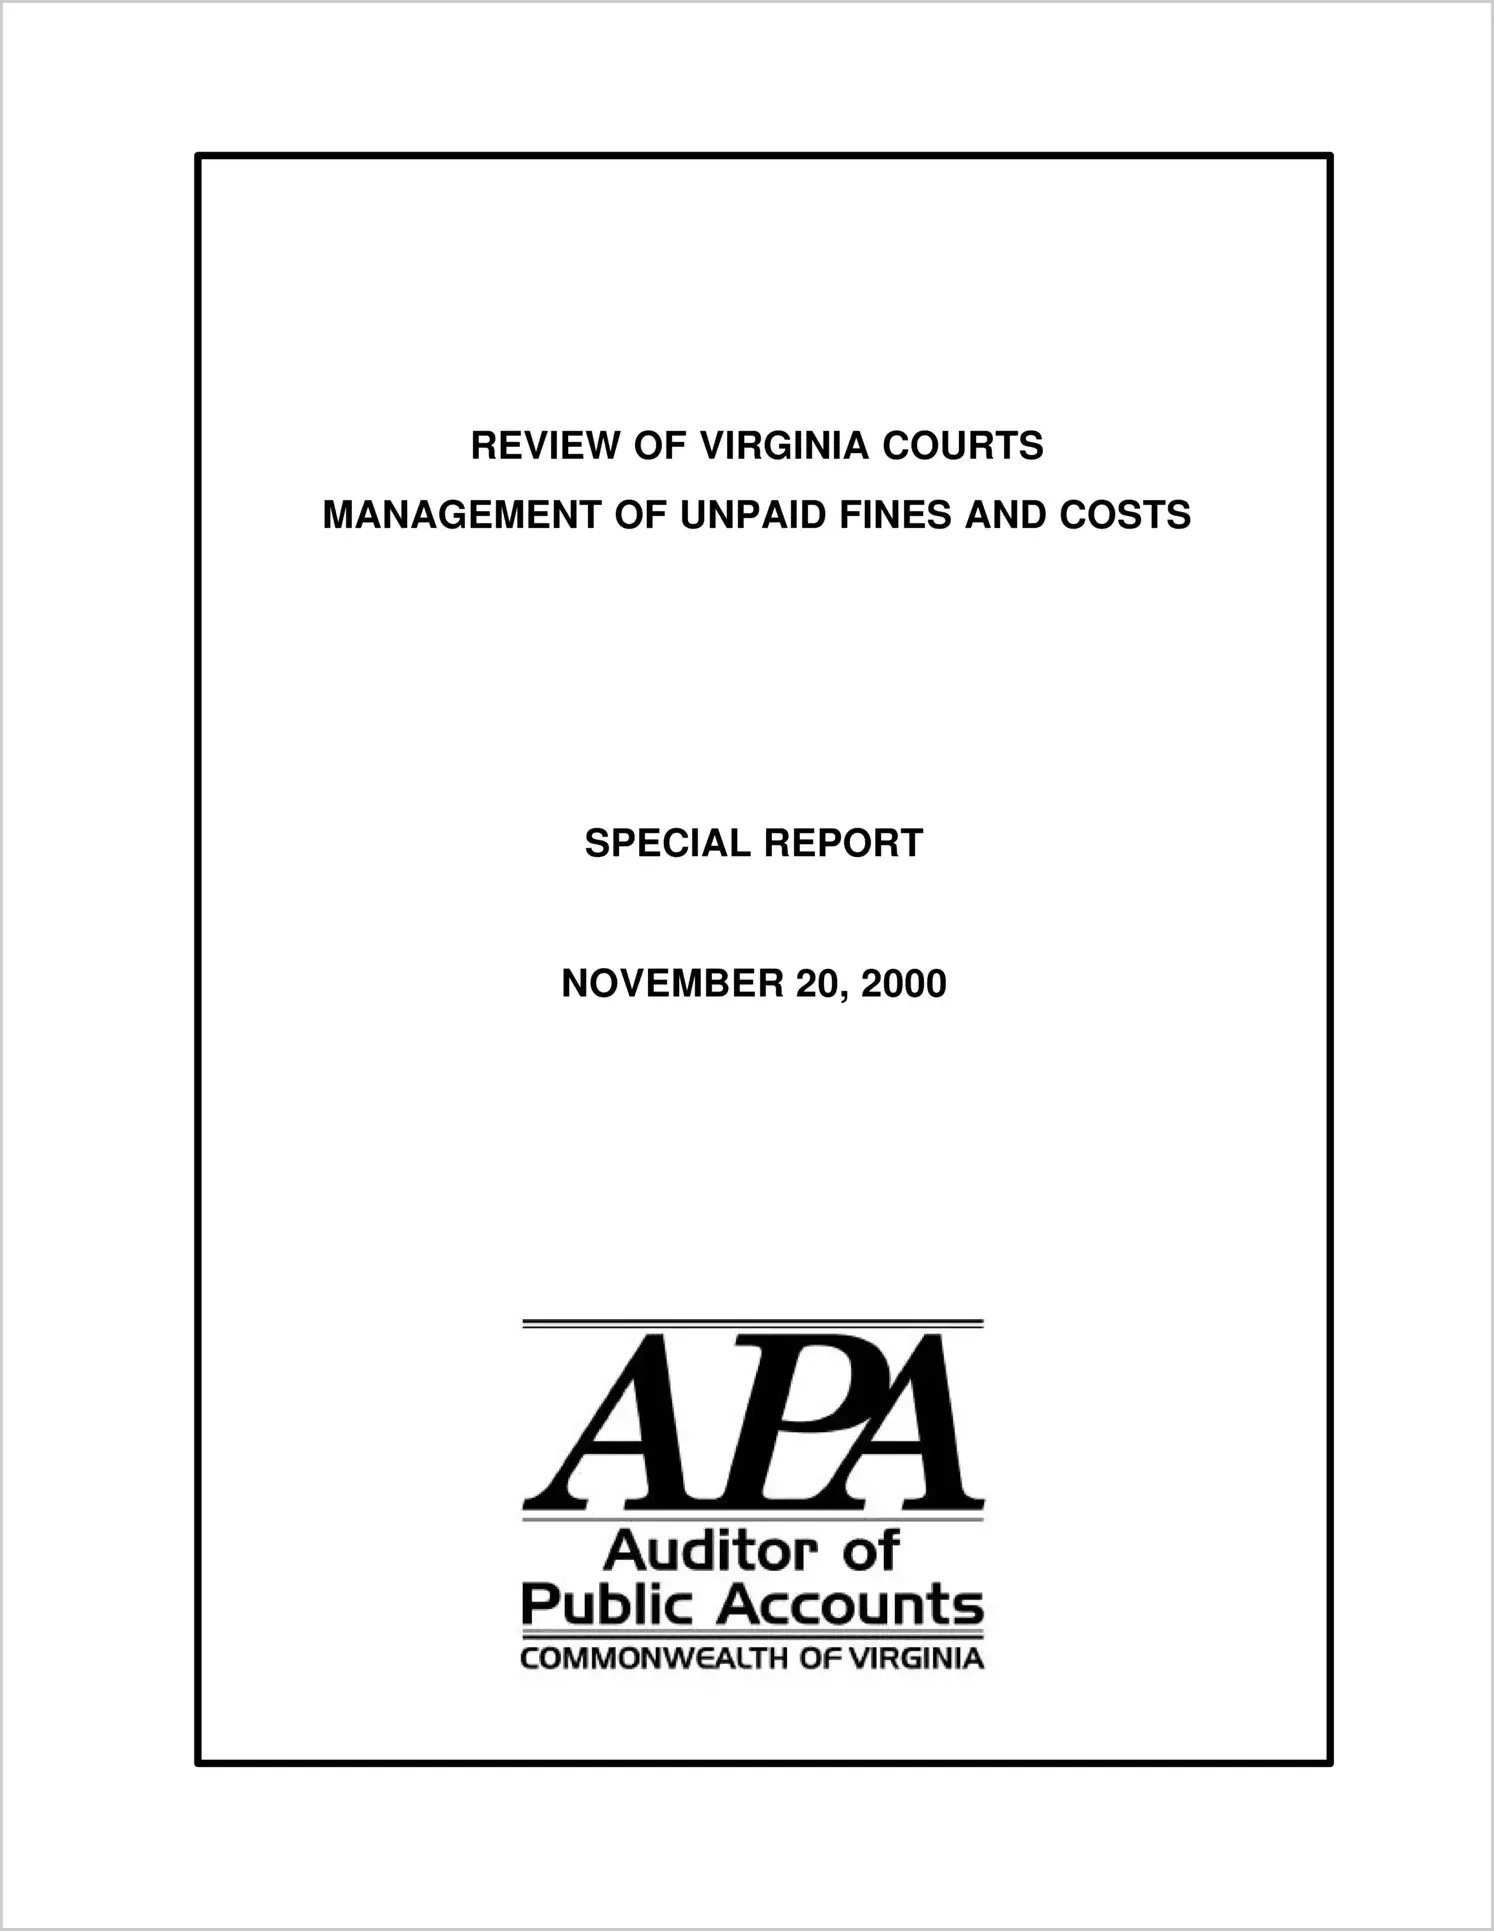 Special Report Review of Virginia Courts Management of Unpaid